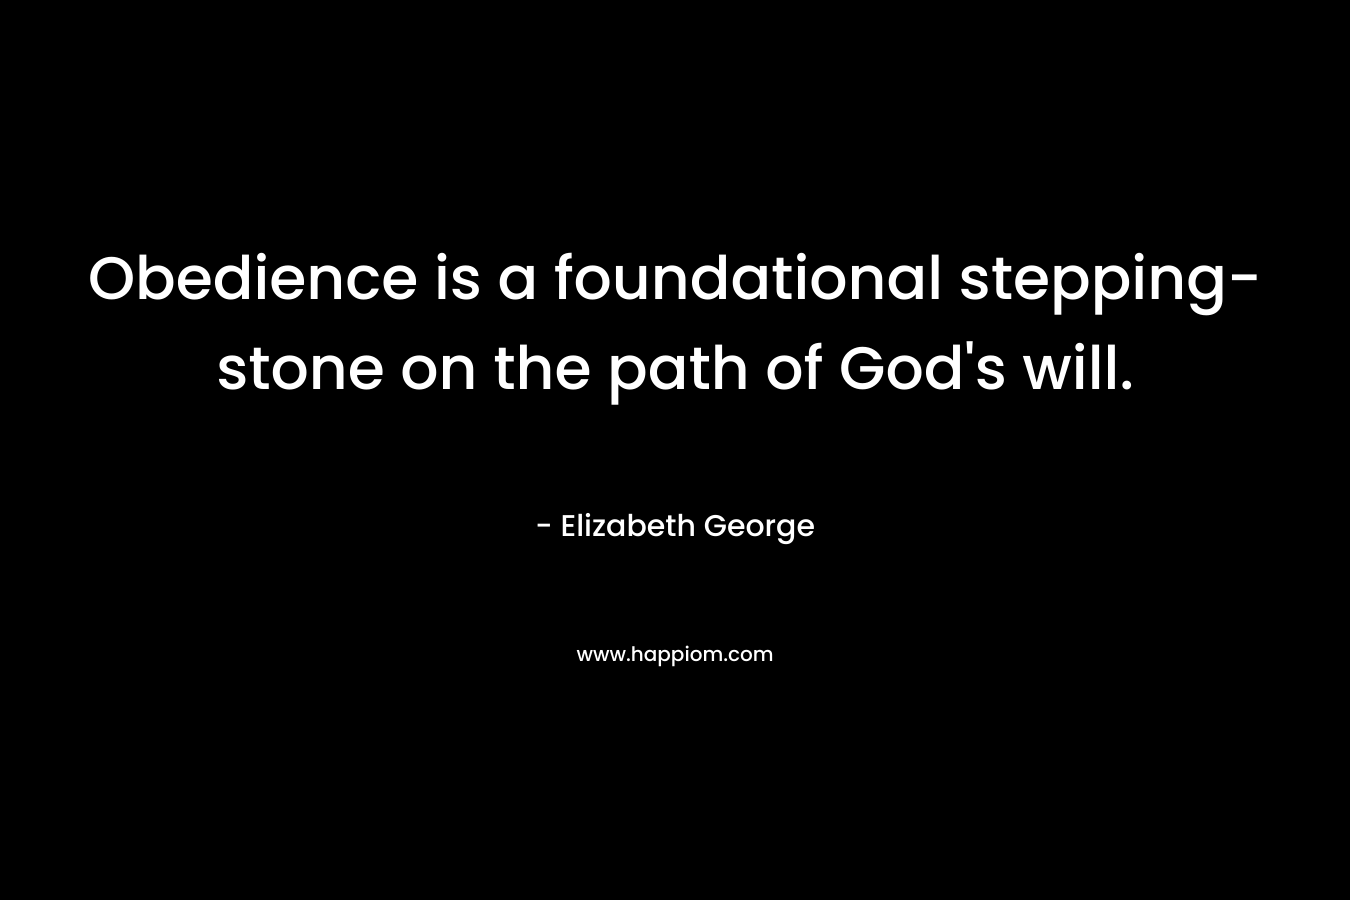 Obedience is a foundational stepping-stone on the path of God’s will. – Elizabeth George